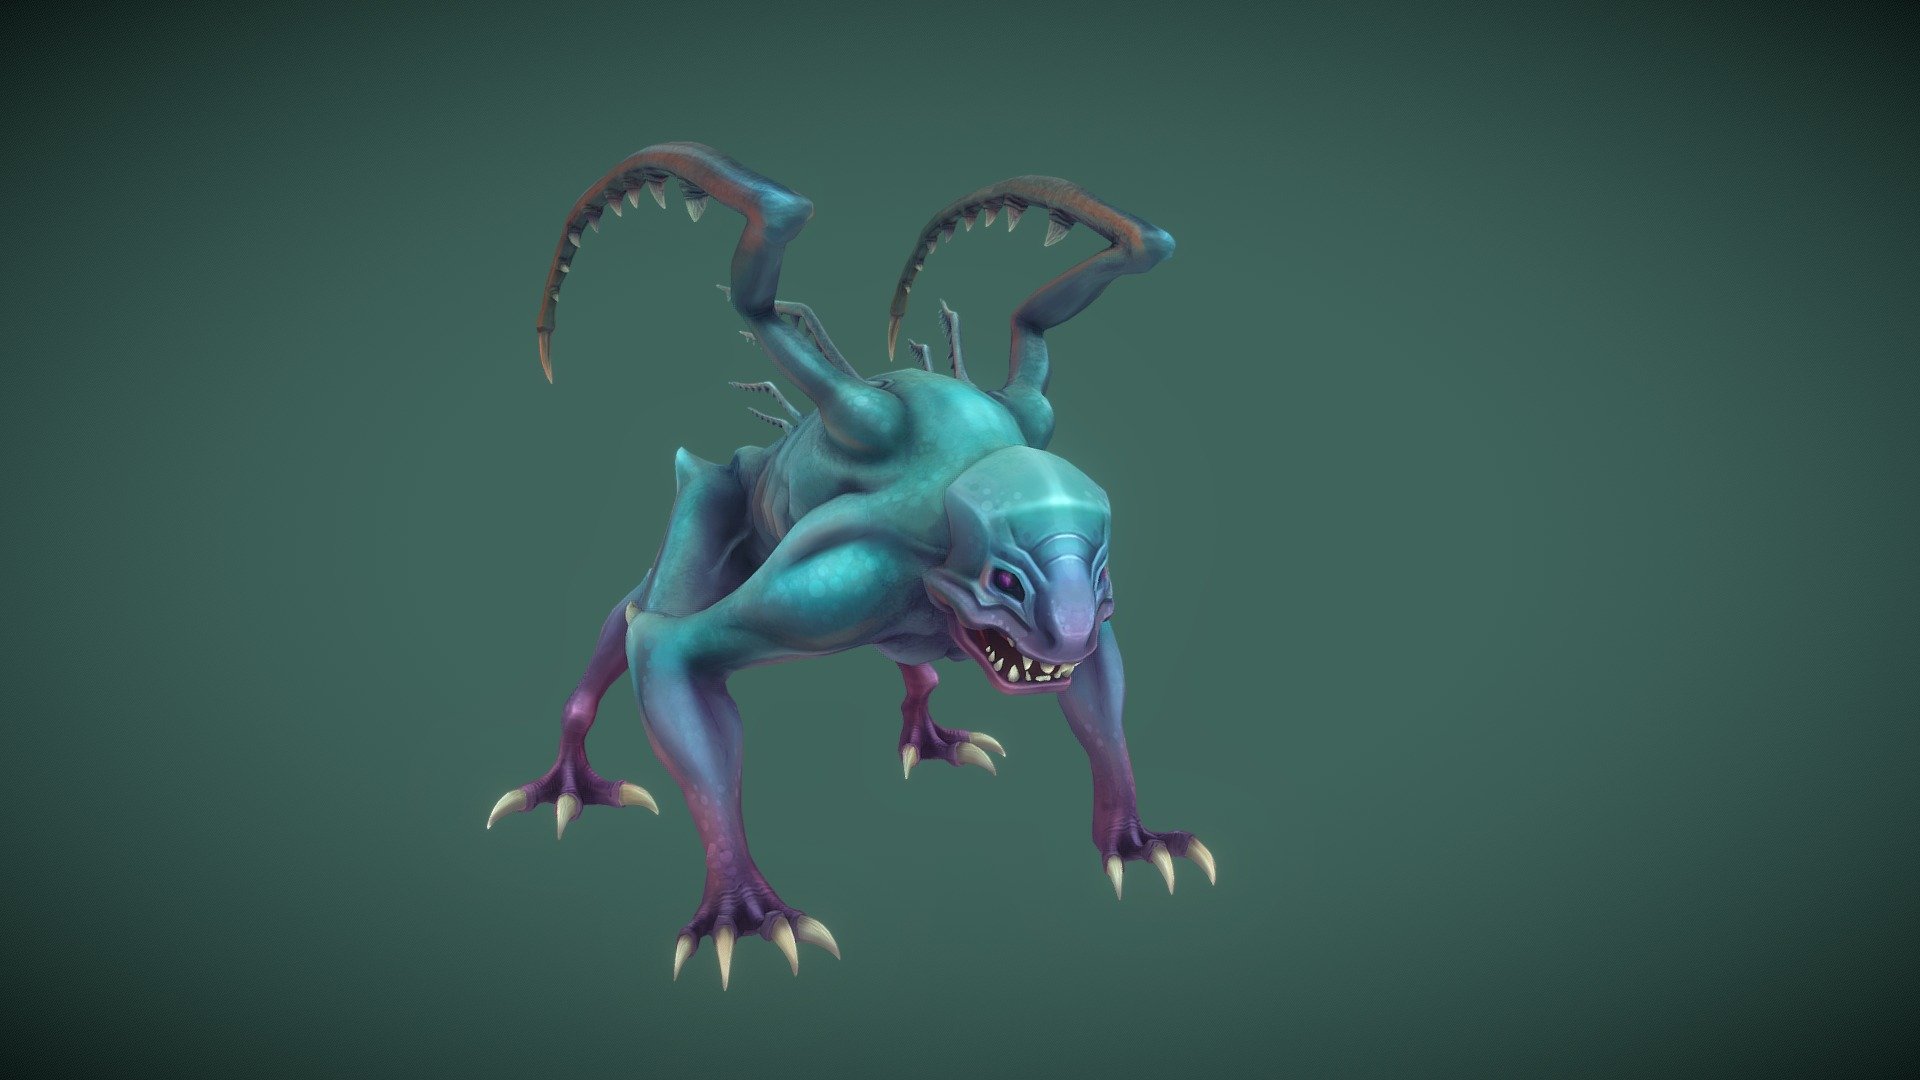 Stylized character for a project.

Software used: Zbrush, Autodesk Maya, Autodesk 3ds Max, Substance Painter - Stylized Great Monster Beast - 3D model by N-hance Studio (@Malice6731) 3d model